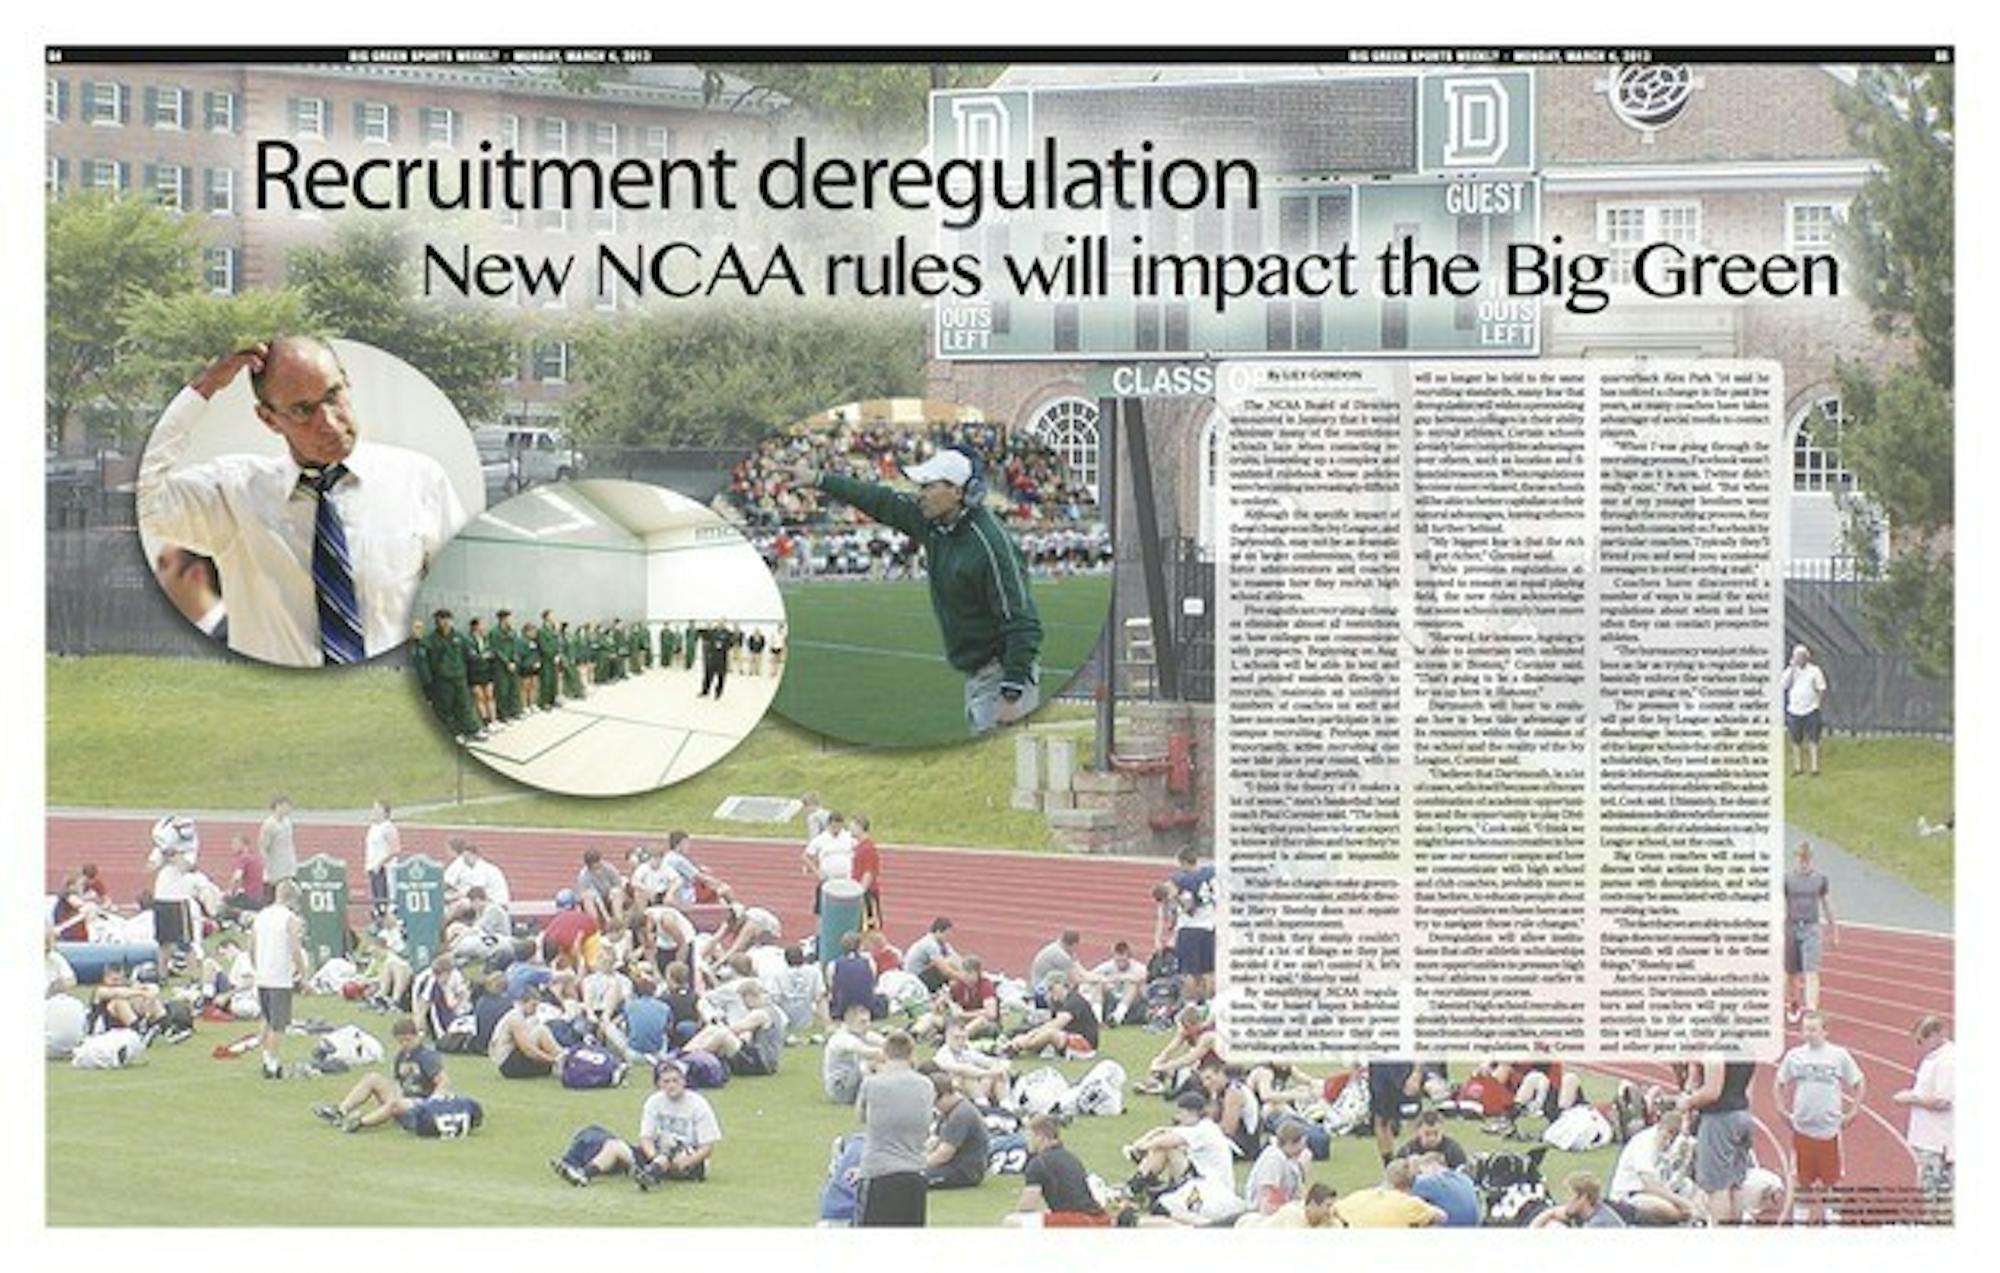 Although the specific impact of these changes on the Ivy League, and Dartmouth, may not be as dramatic as on larger conferences, they will force administrators and coaches to reassess how they recruit high school athletes.